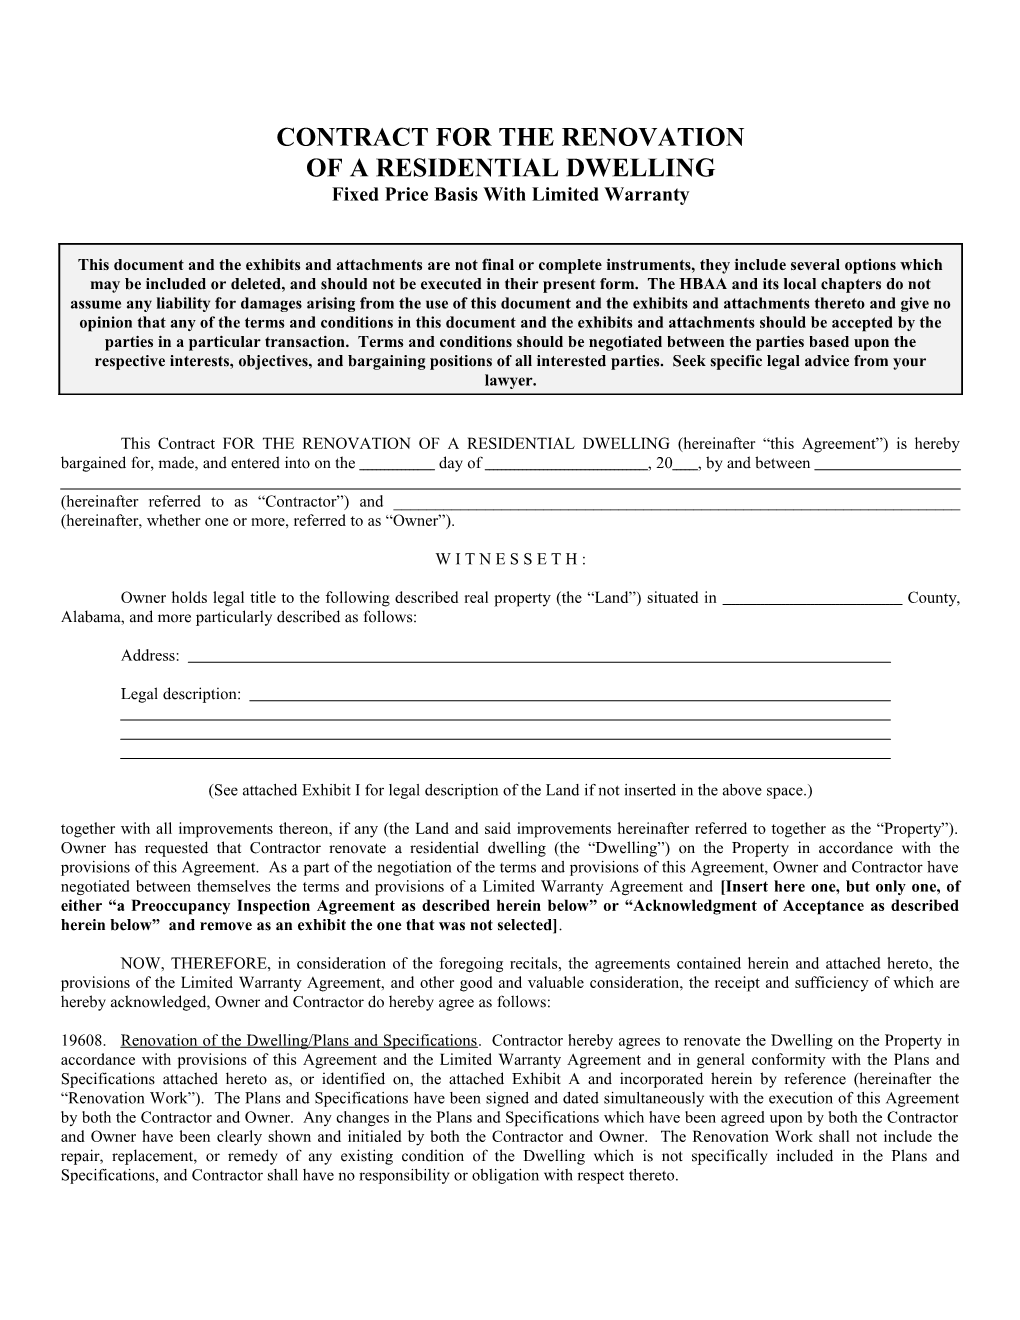 Agreement for the Renovation